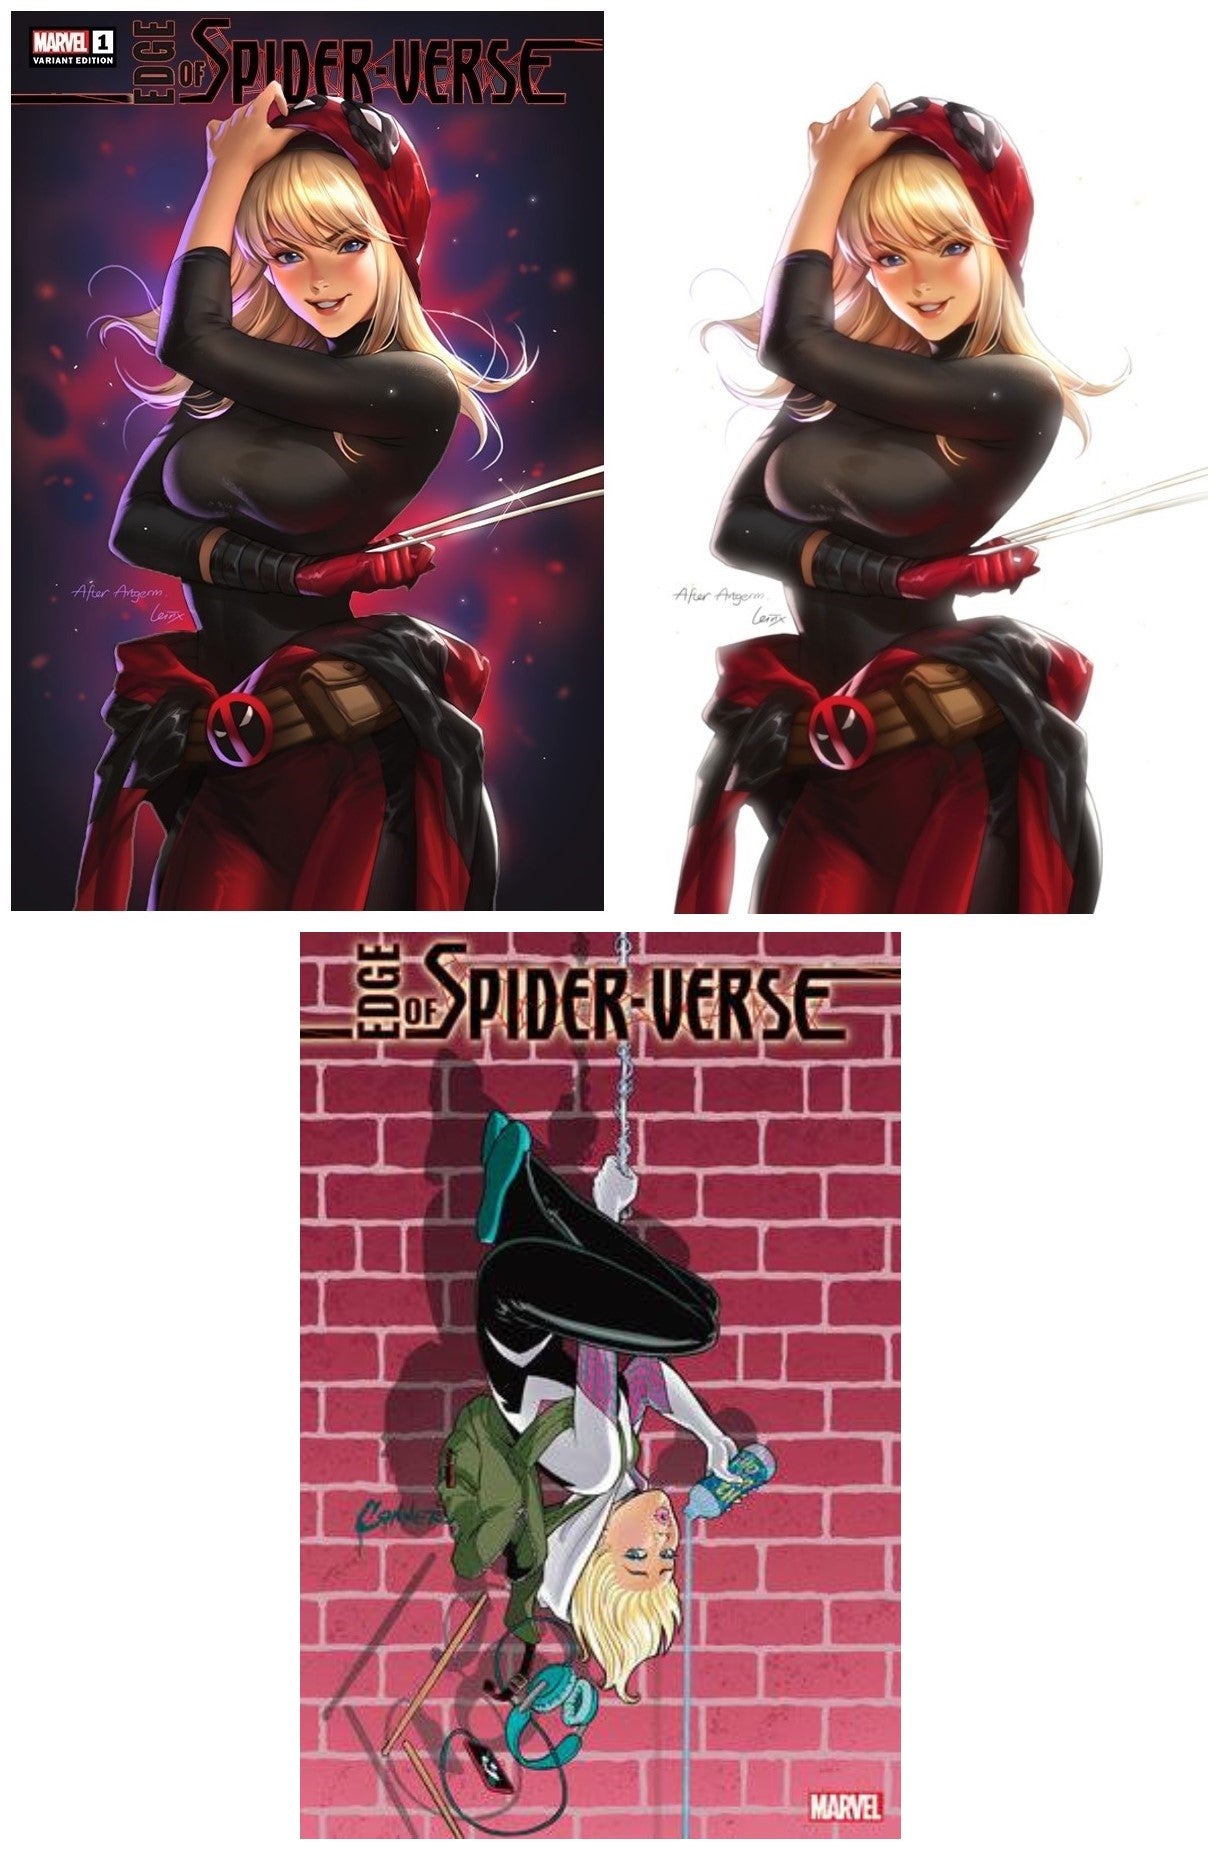 EDGE OF SPIDER-VERSE #1 LEIRIX LI HOMAGE TRADE/VIRGIN VARIANT SET LIMITED TO 600 SETS WITH NUMBERED COA + 1:25 VARIANT